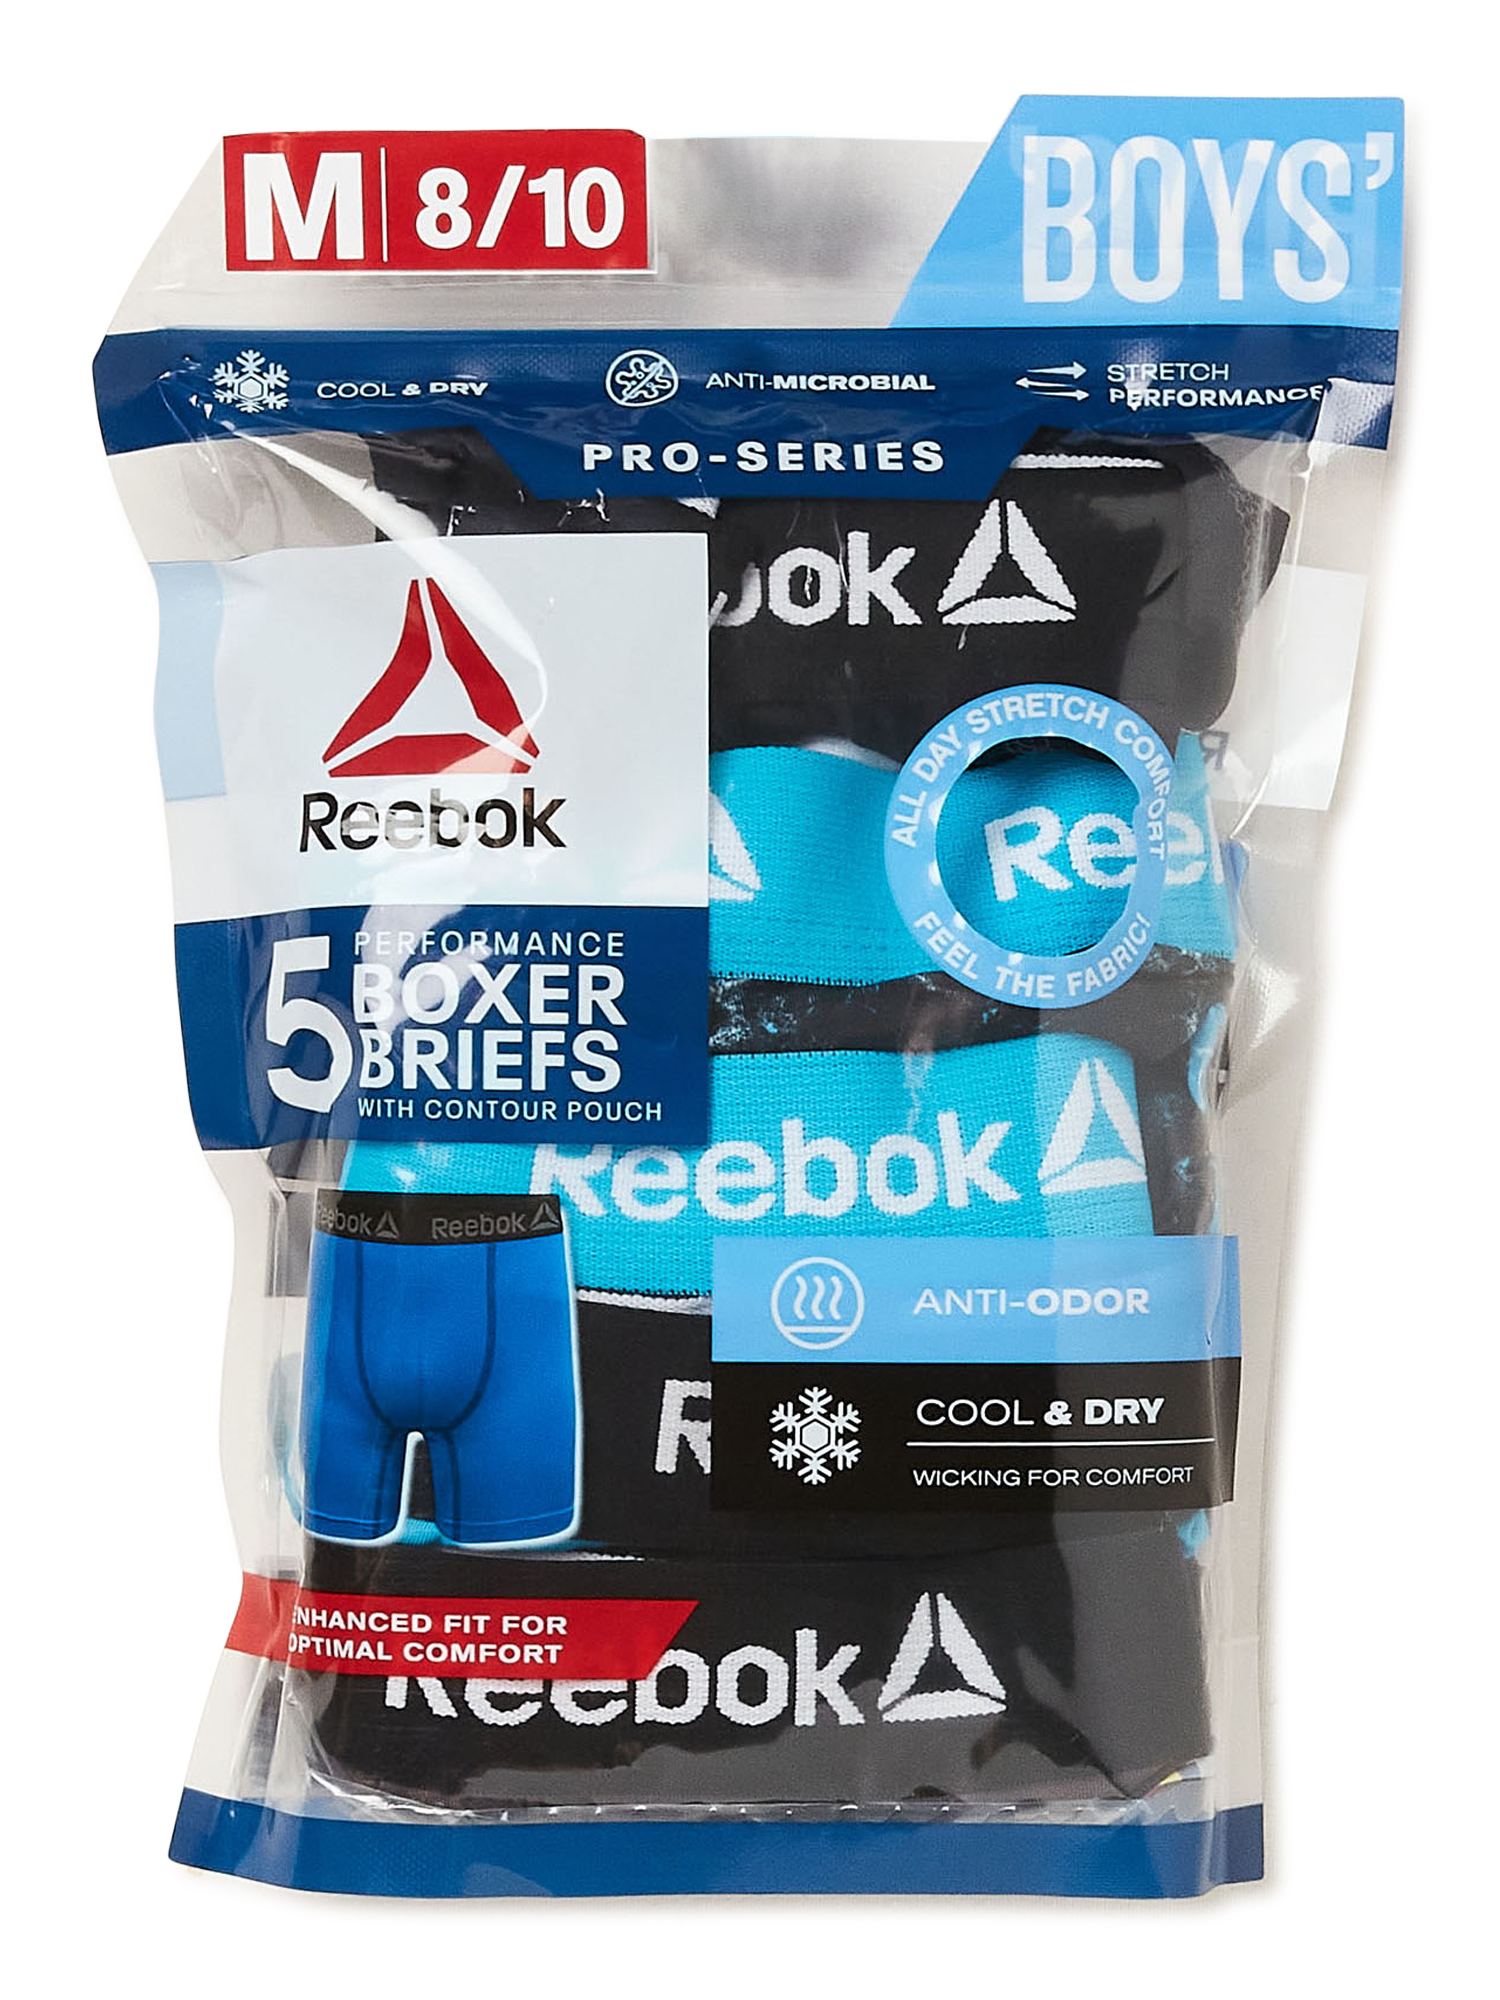 Reebok Boys Performance Boxer Briefs, 5-Pack - image 3 of 4